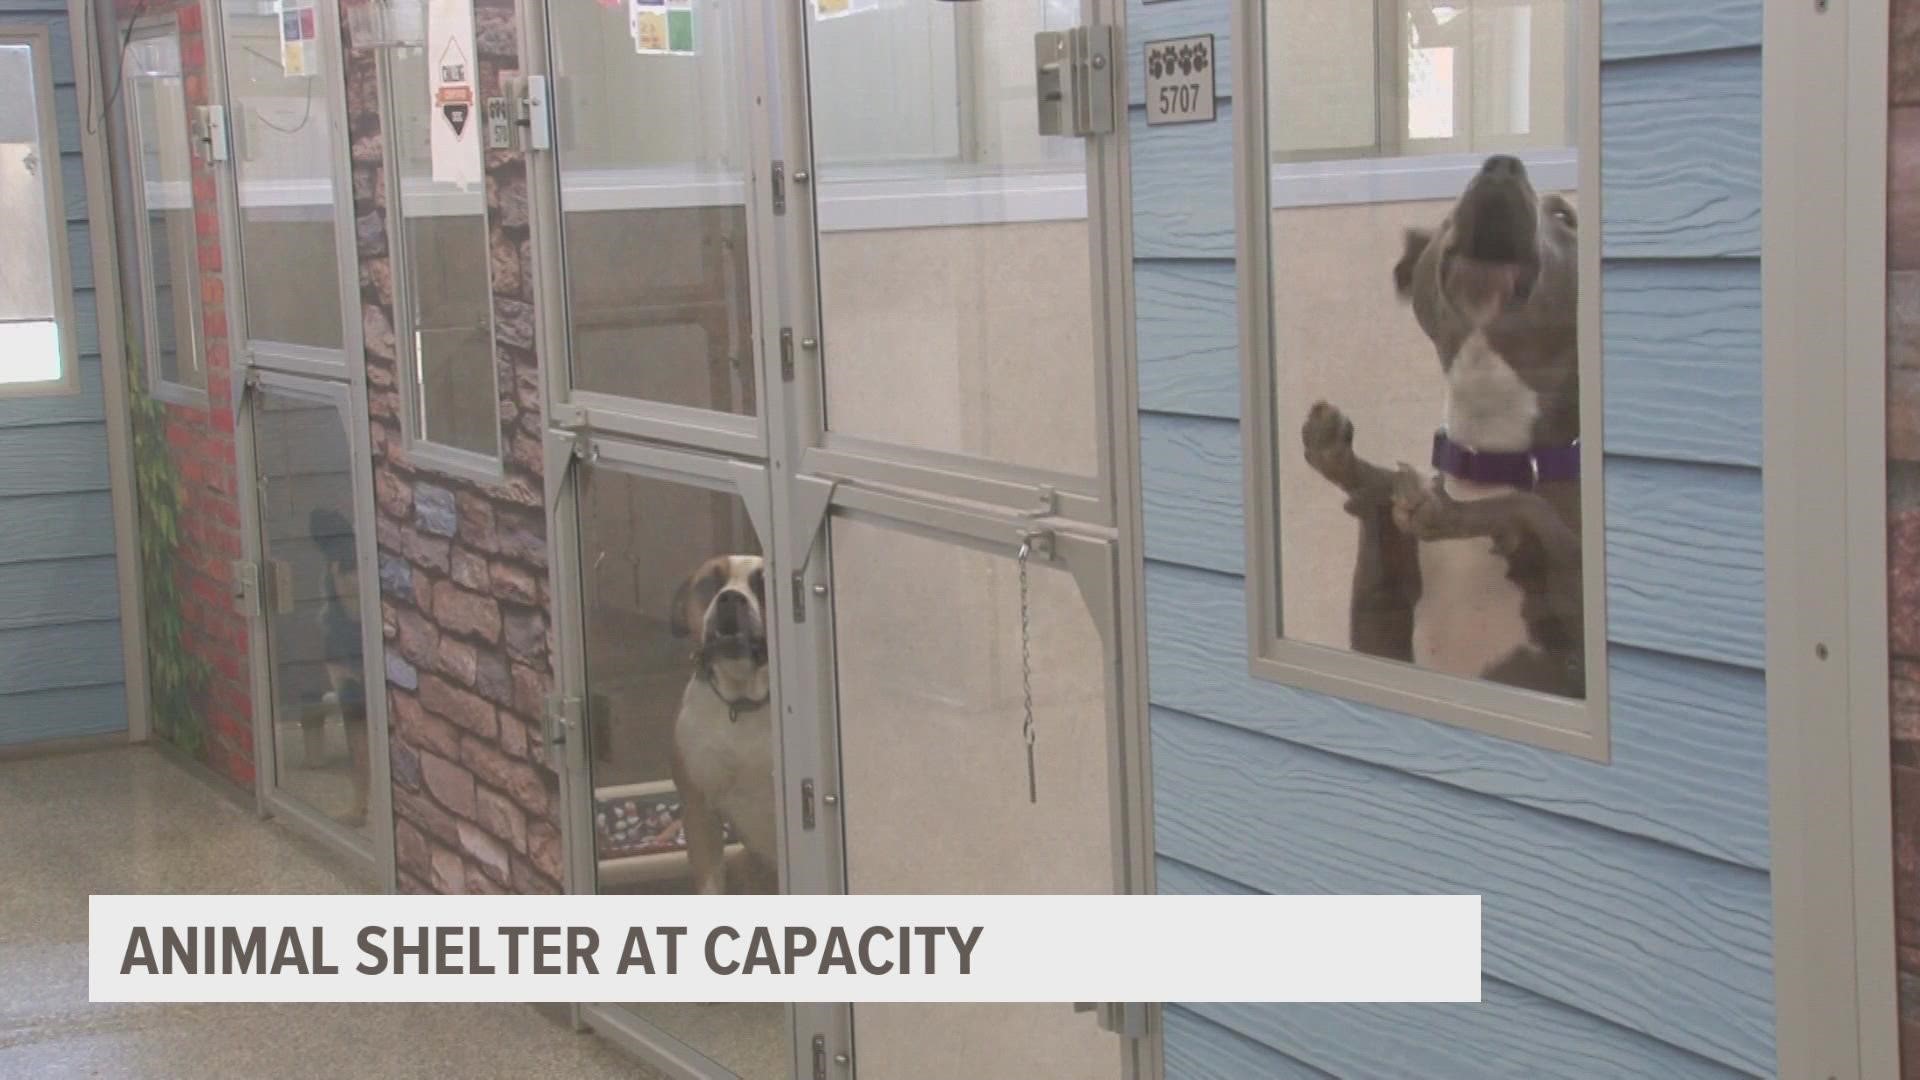 The animal shelter AHeinz57 is at capacity with rescues. The CEO shares the reason why.